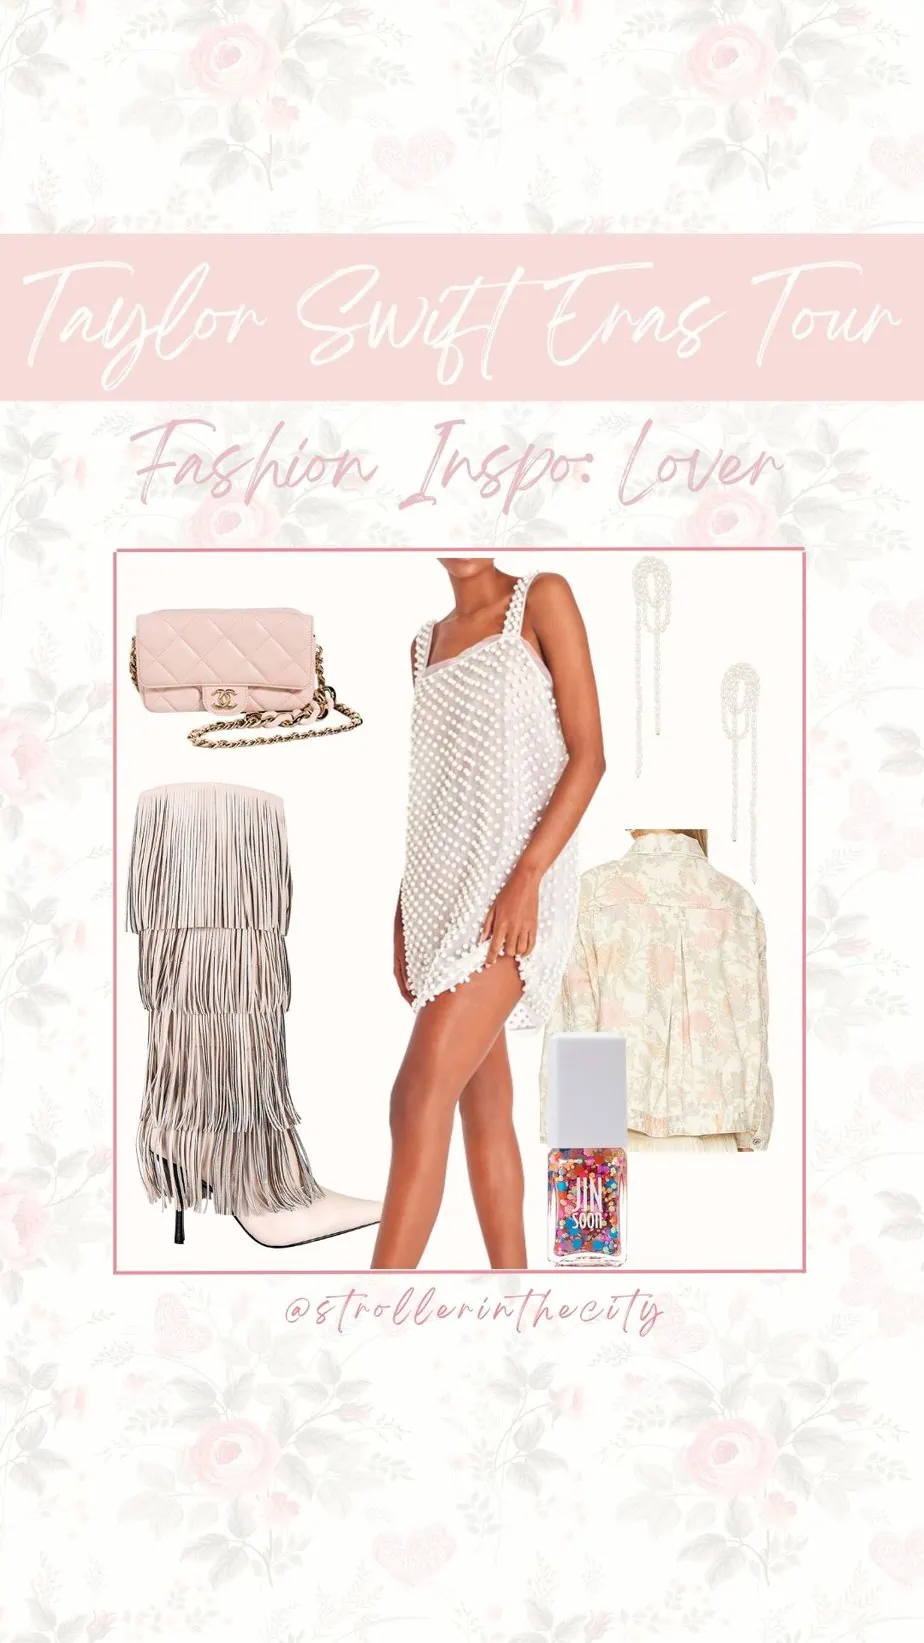 Concert outfit inspired by Taylor Swift's "Lover" Era featuring a white mini dress and dangle sequin earrings